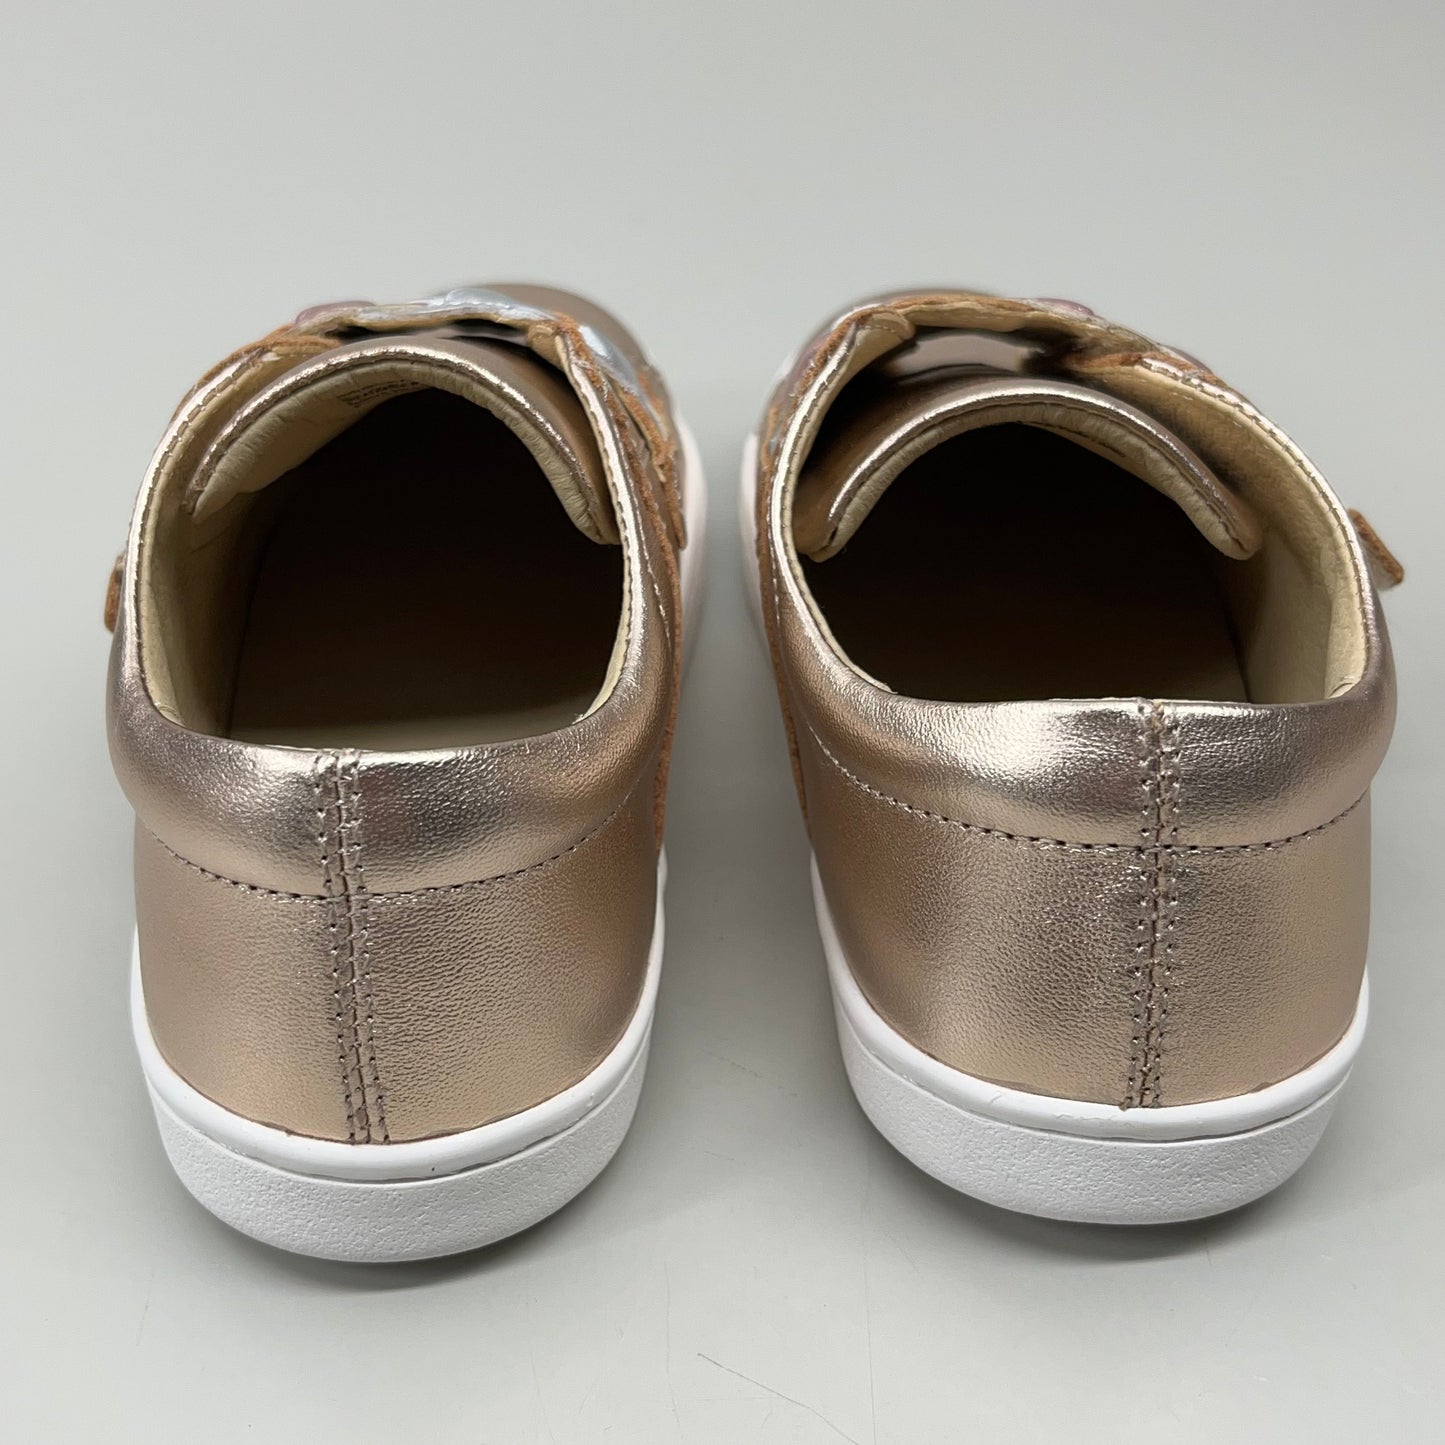 OLD SOLES Igster Sneakers Kid's Leather Shoe Sz 26 US 9.5 Copper/Silver/Pink Frost #6132